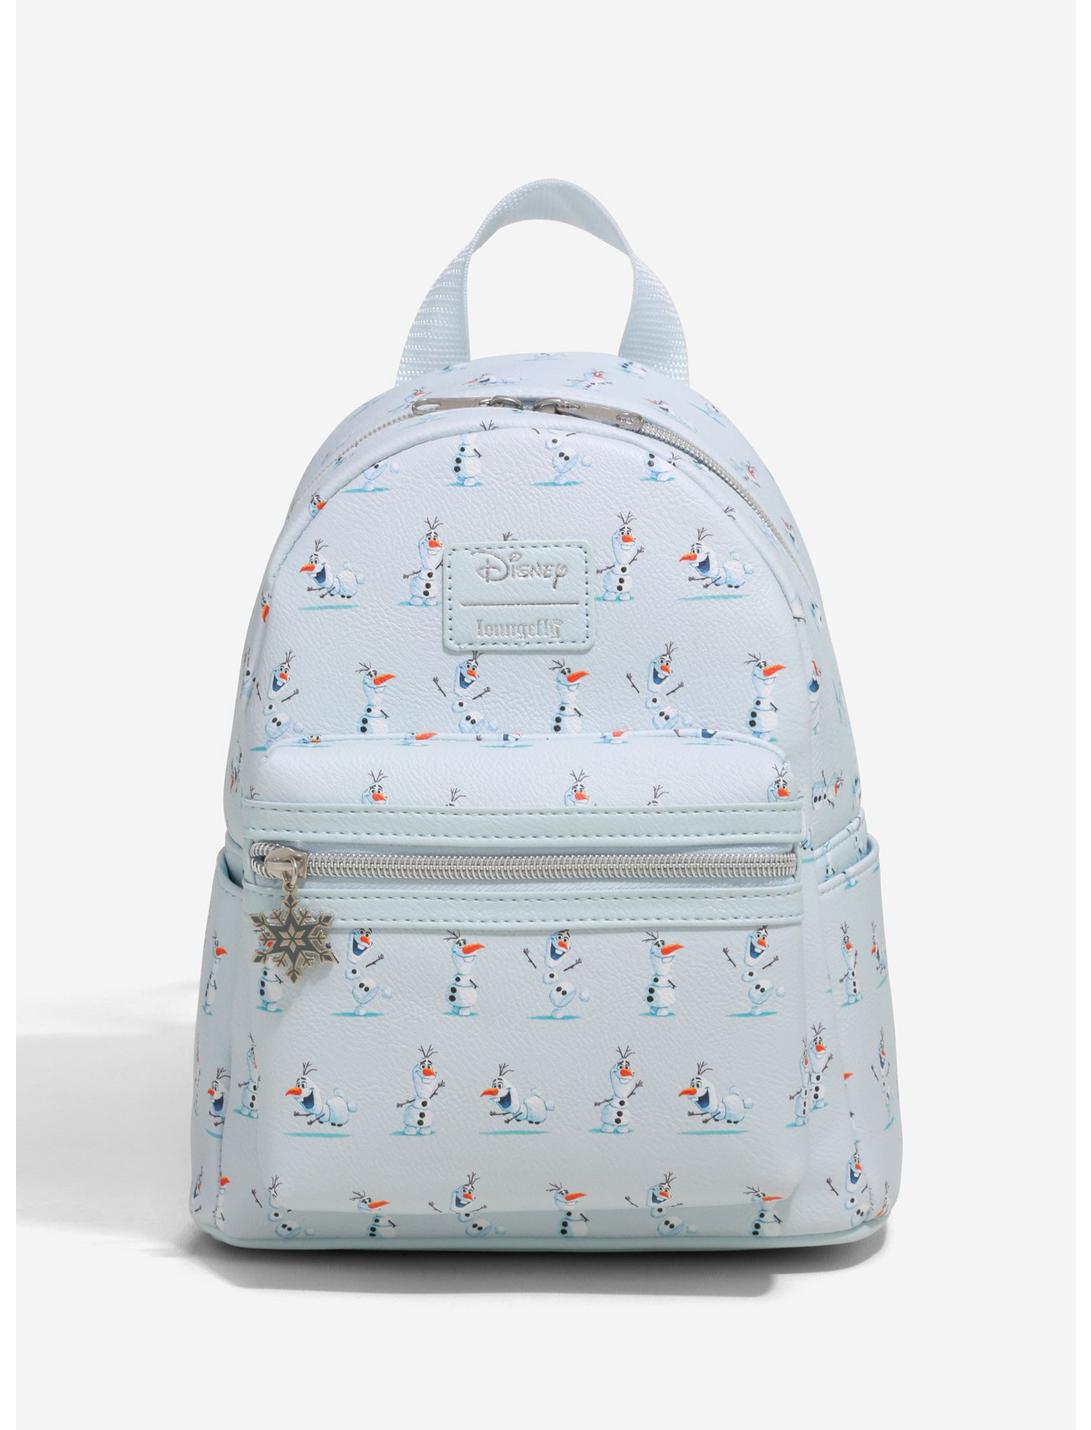 Loungefly Disney Frozen Olaf Mini Backpack, , hi-res